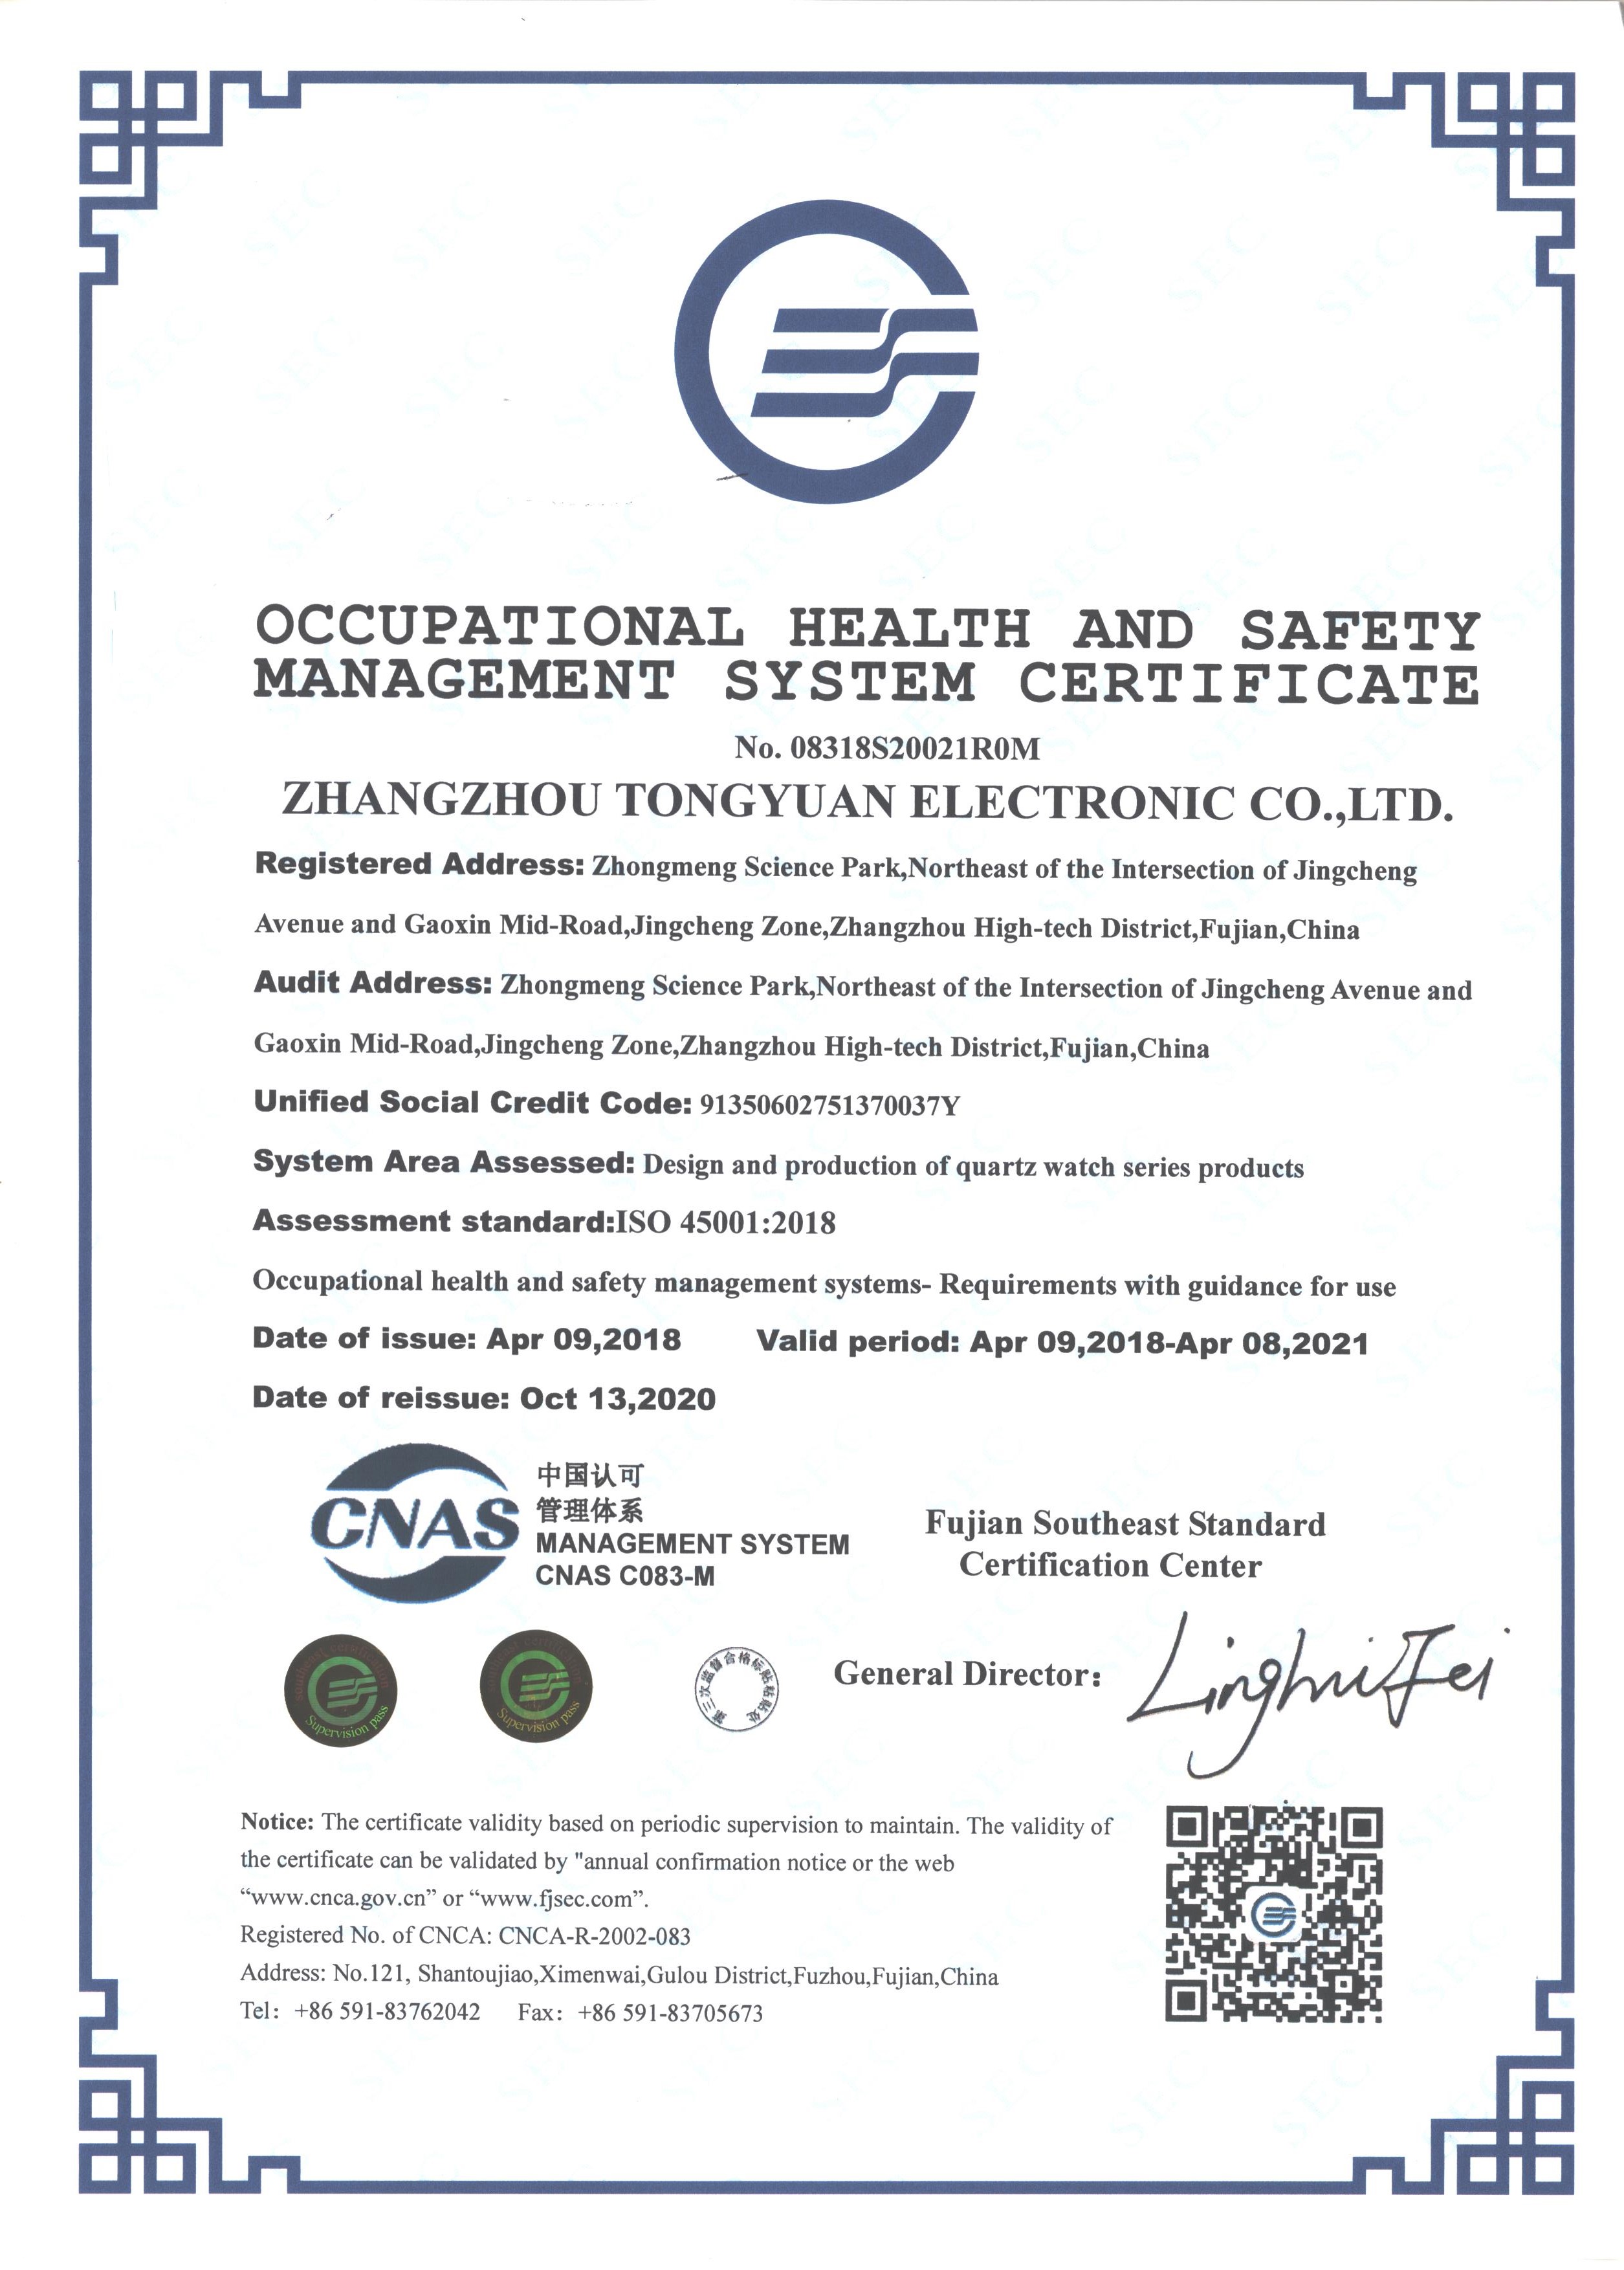 Occupational Health and Safety Management System English